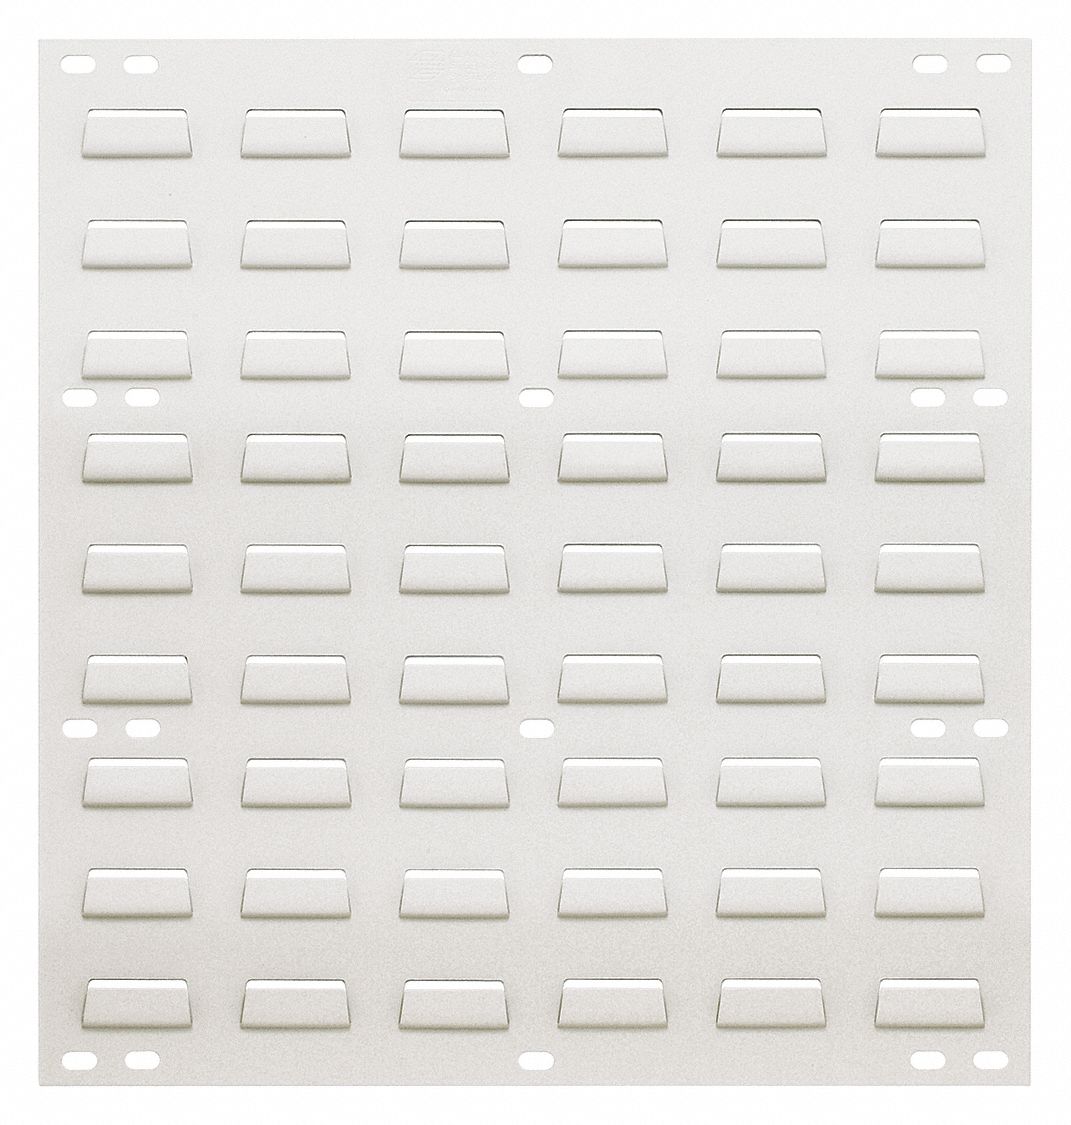 30WX01 - G6998 Louvered Panel 175 lb. Oyster White